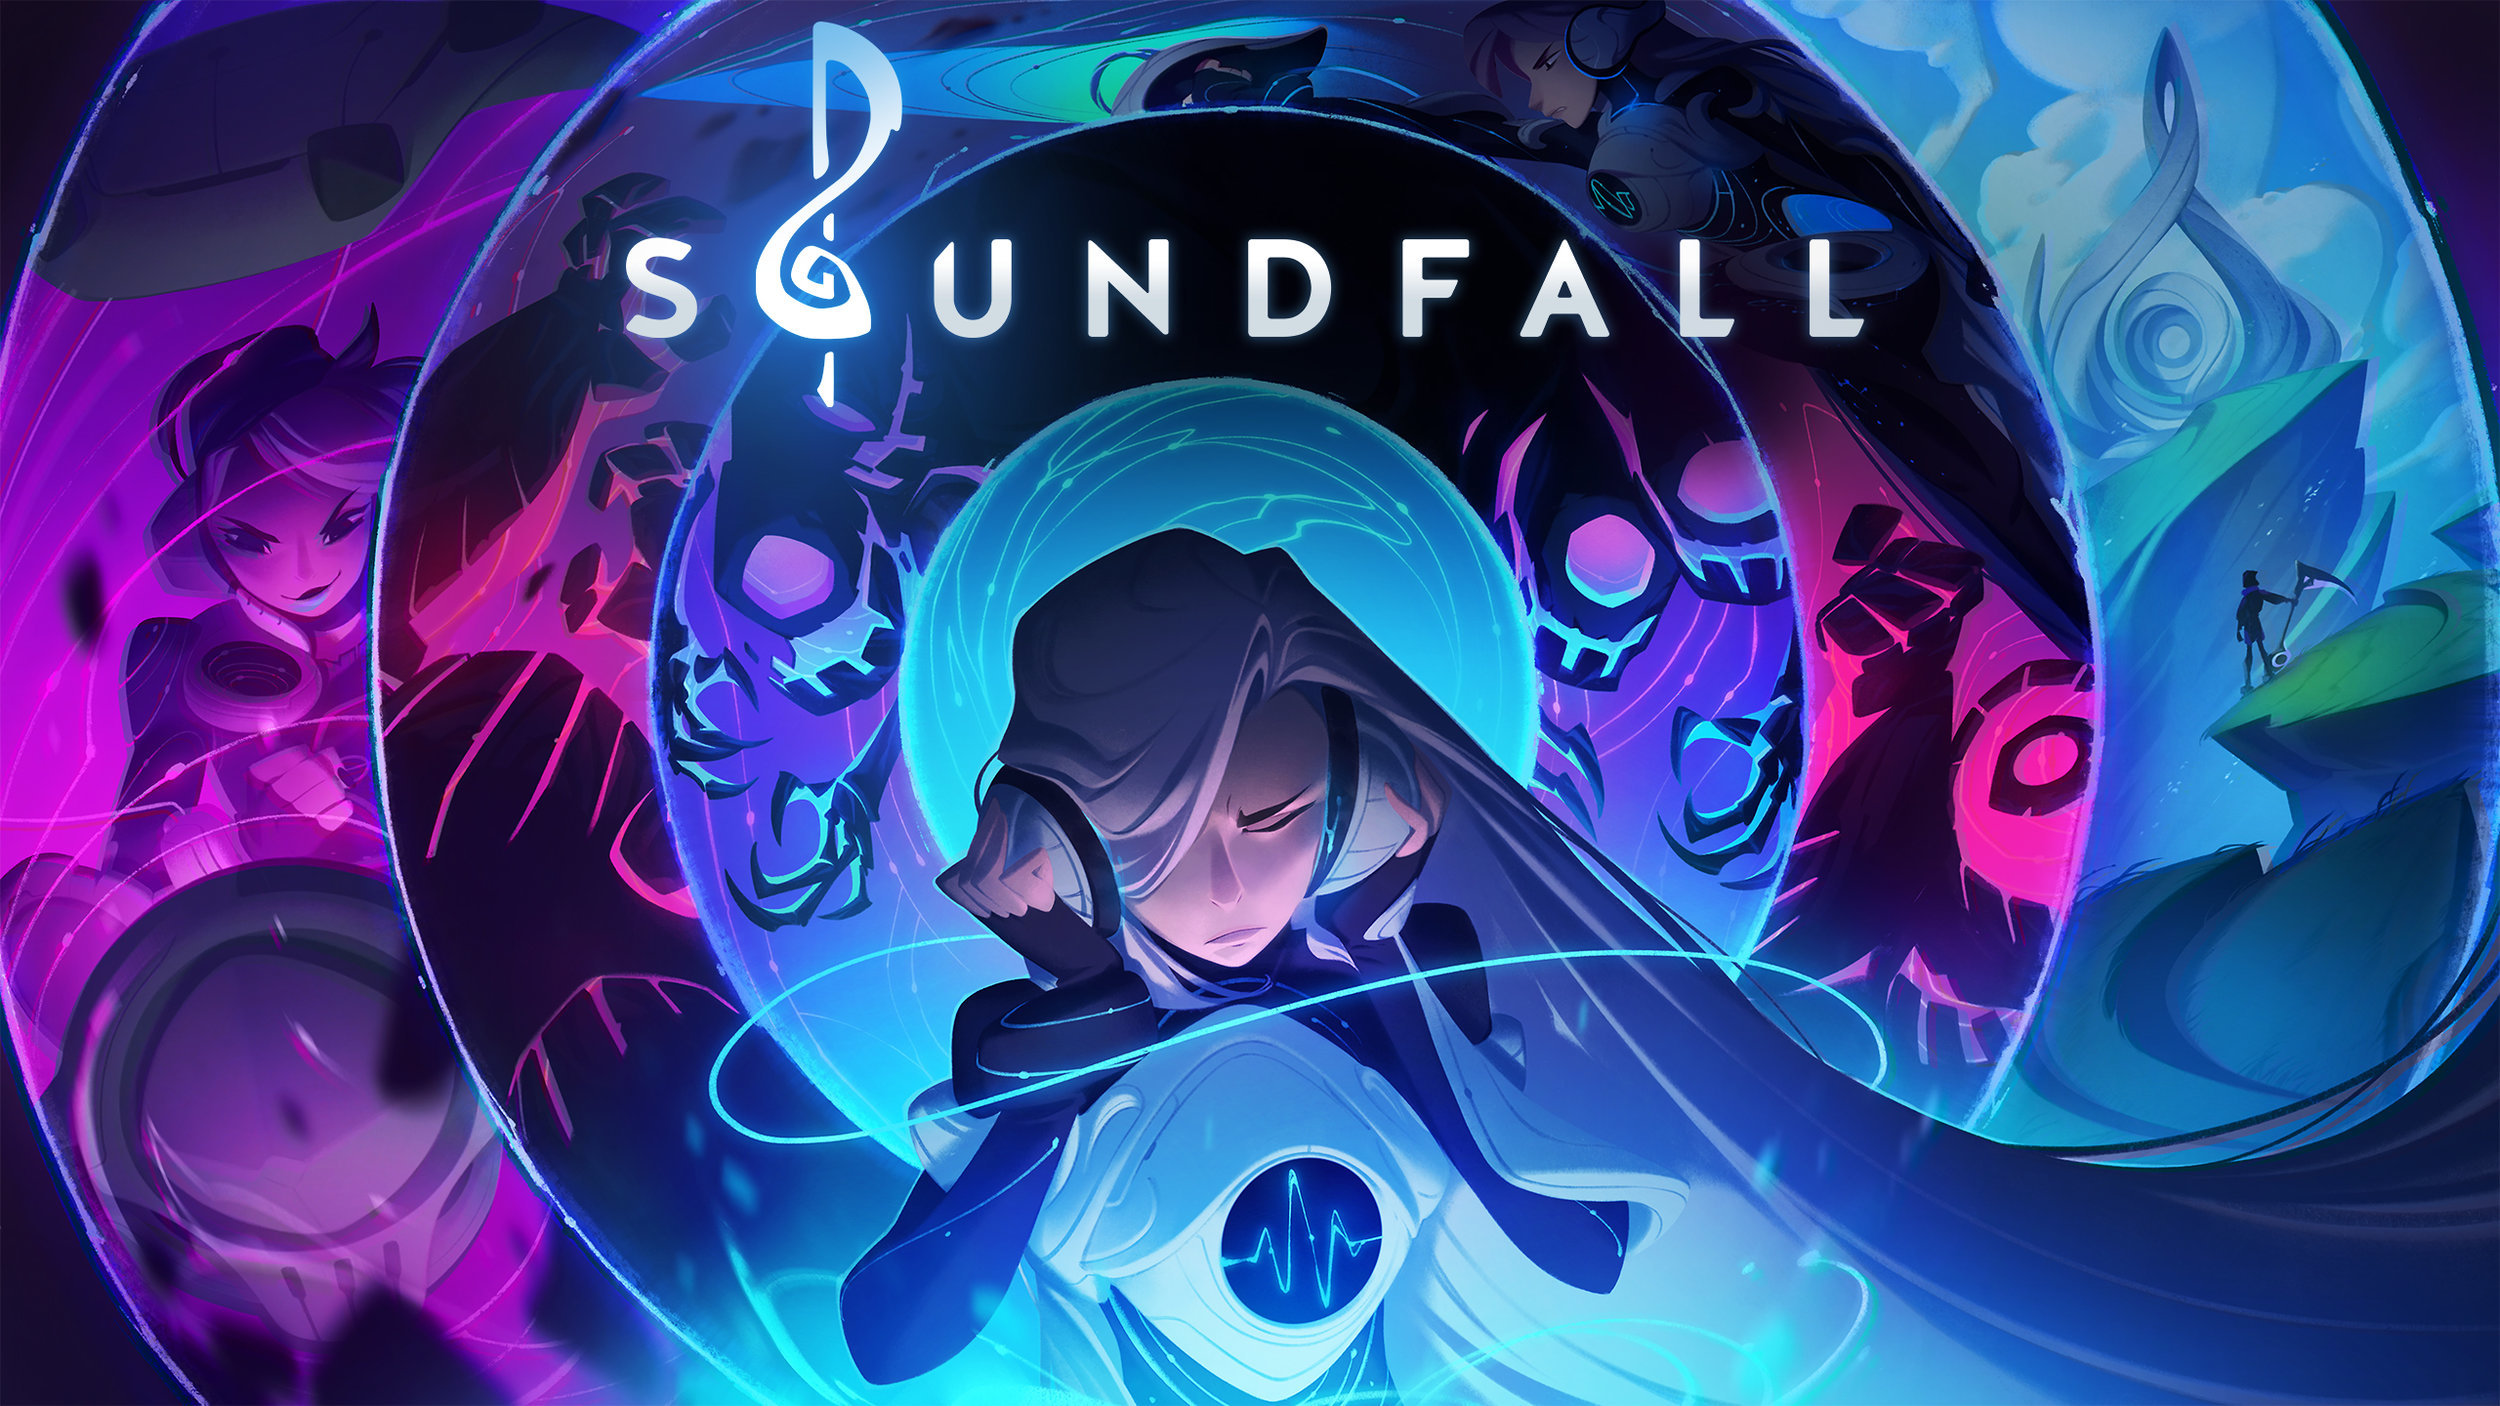 Video Game Soundfall HD Wallpaper | Background Image